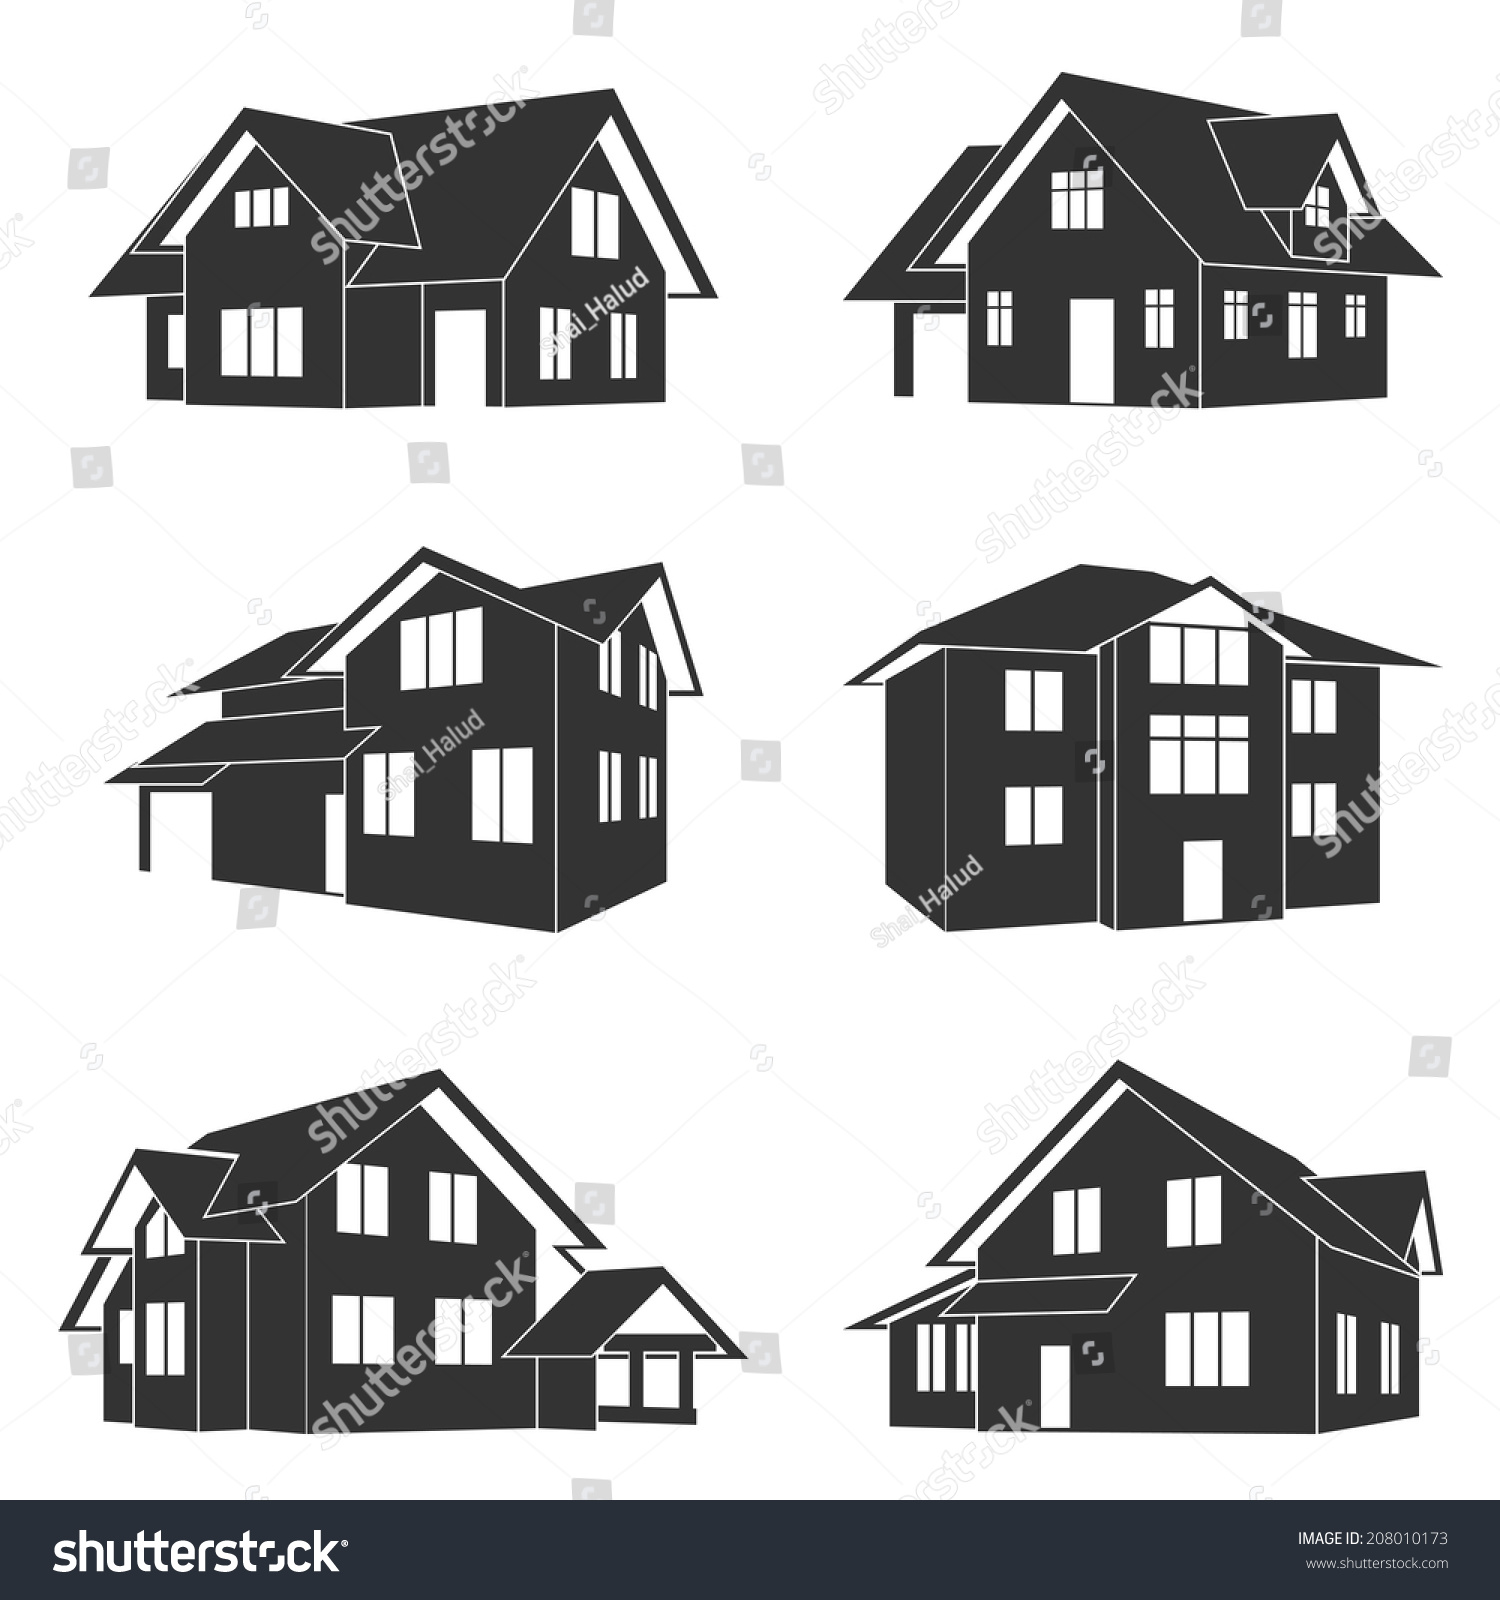 Set Black White Silhouette Icons Houses Stock Vector (Royalty Free